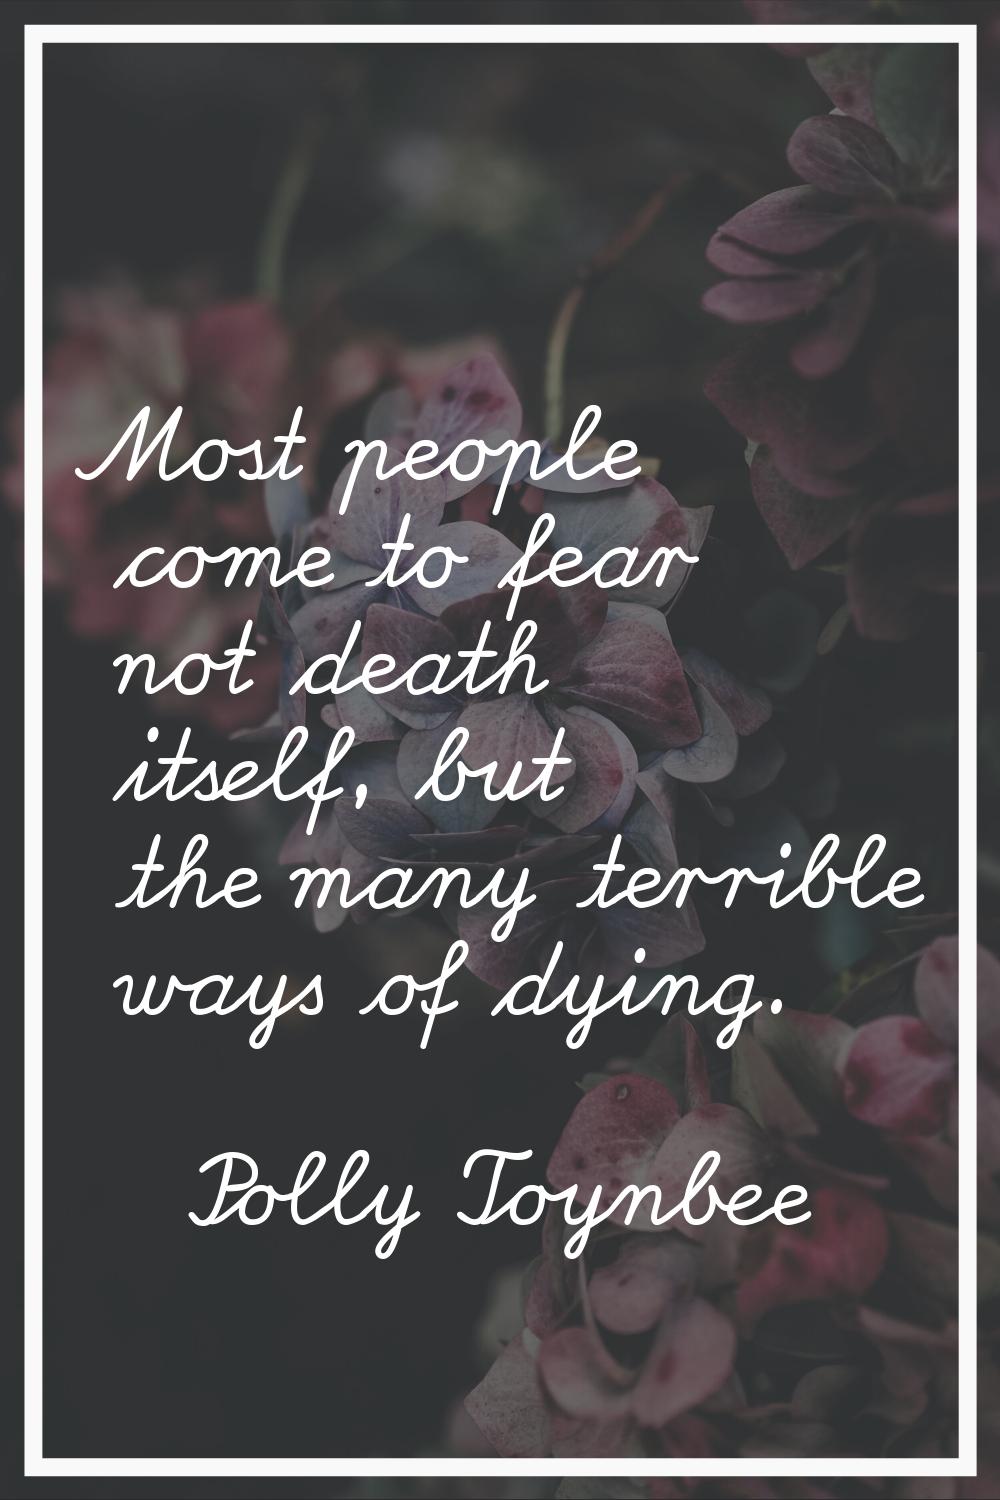 Most people come to fear not death itself, but the many terrible ways of dying.